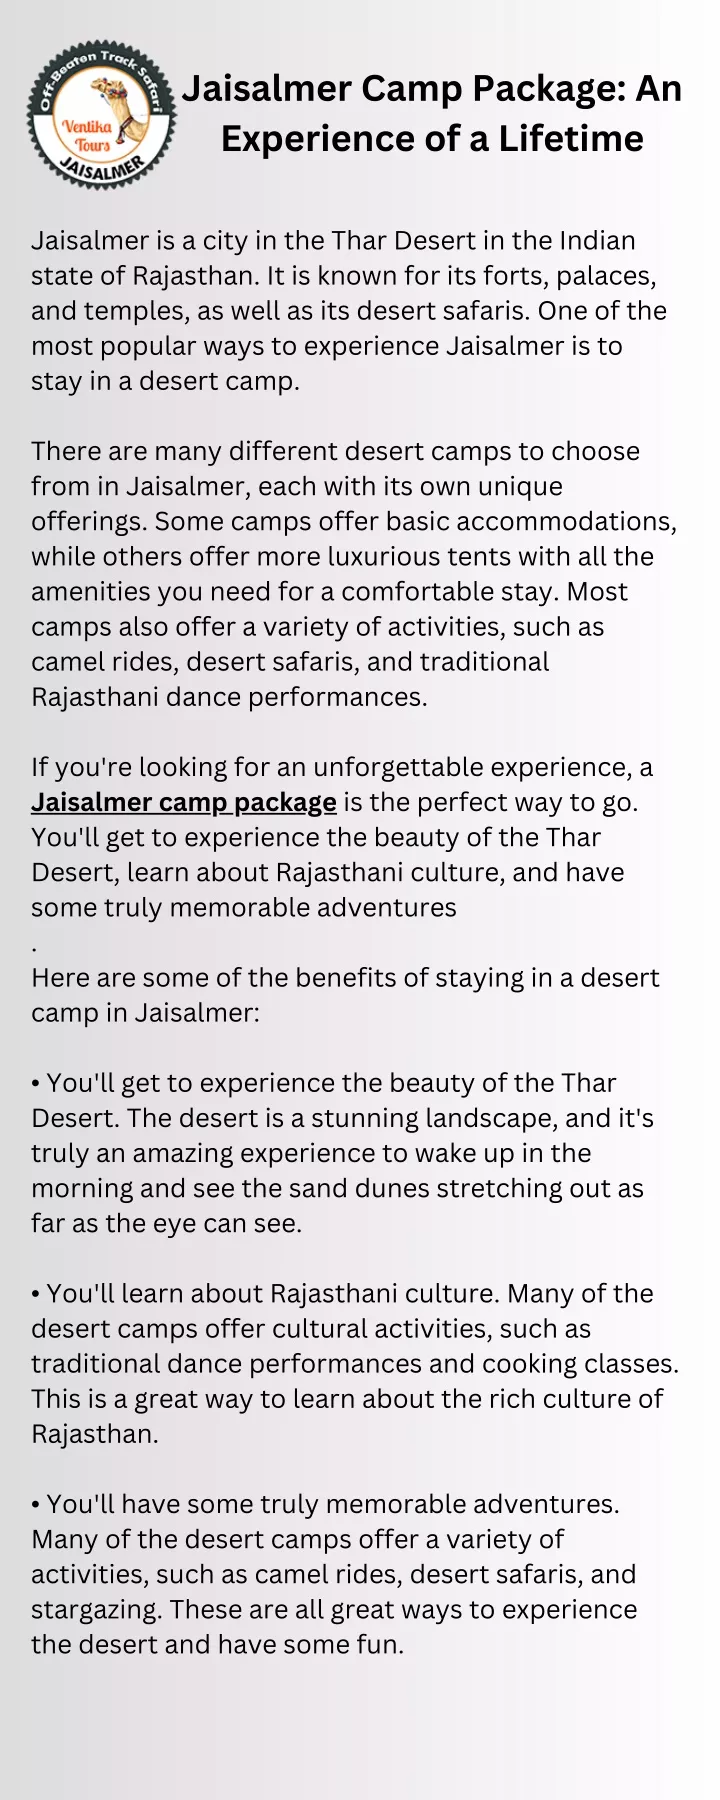 jaisalmer camp package an experience of a lifetime